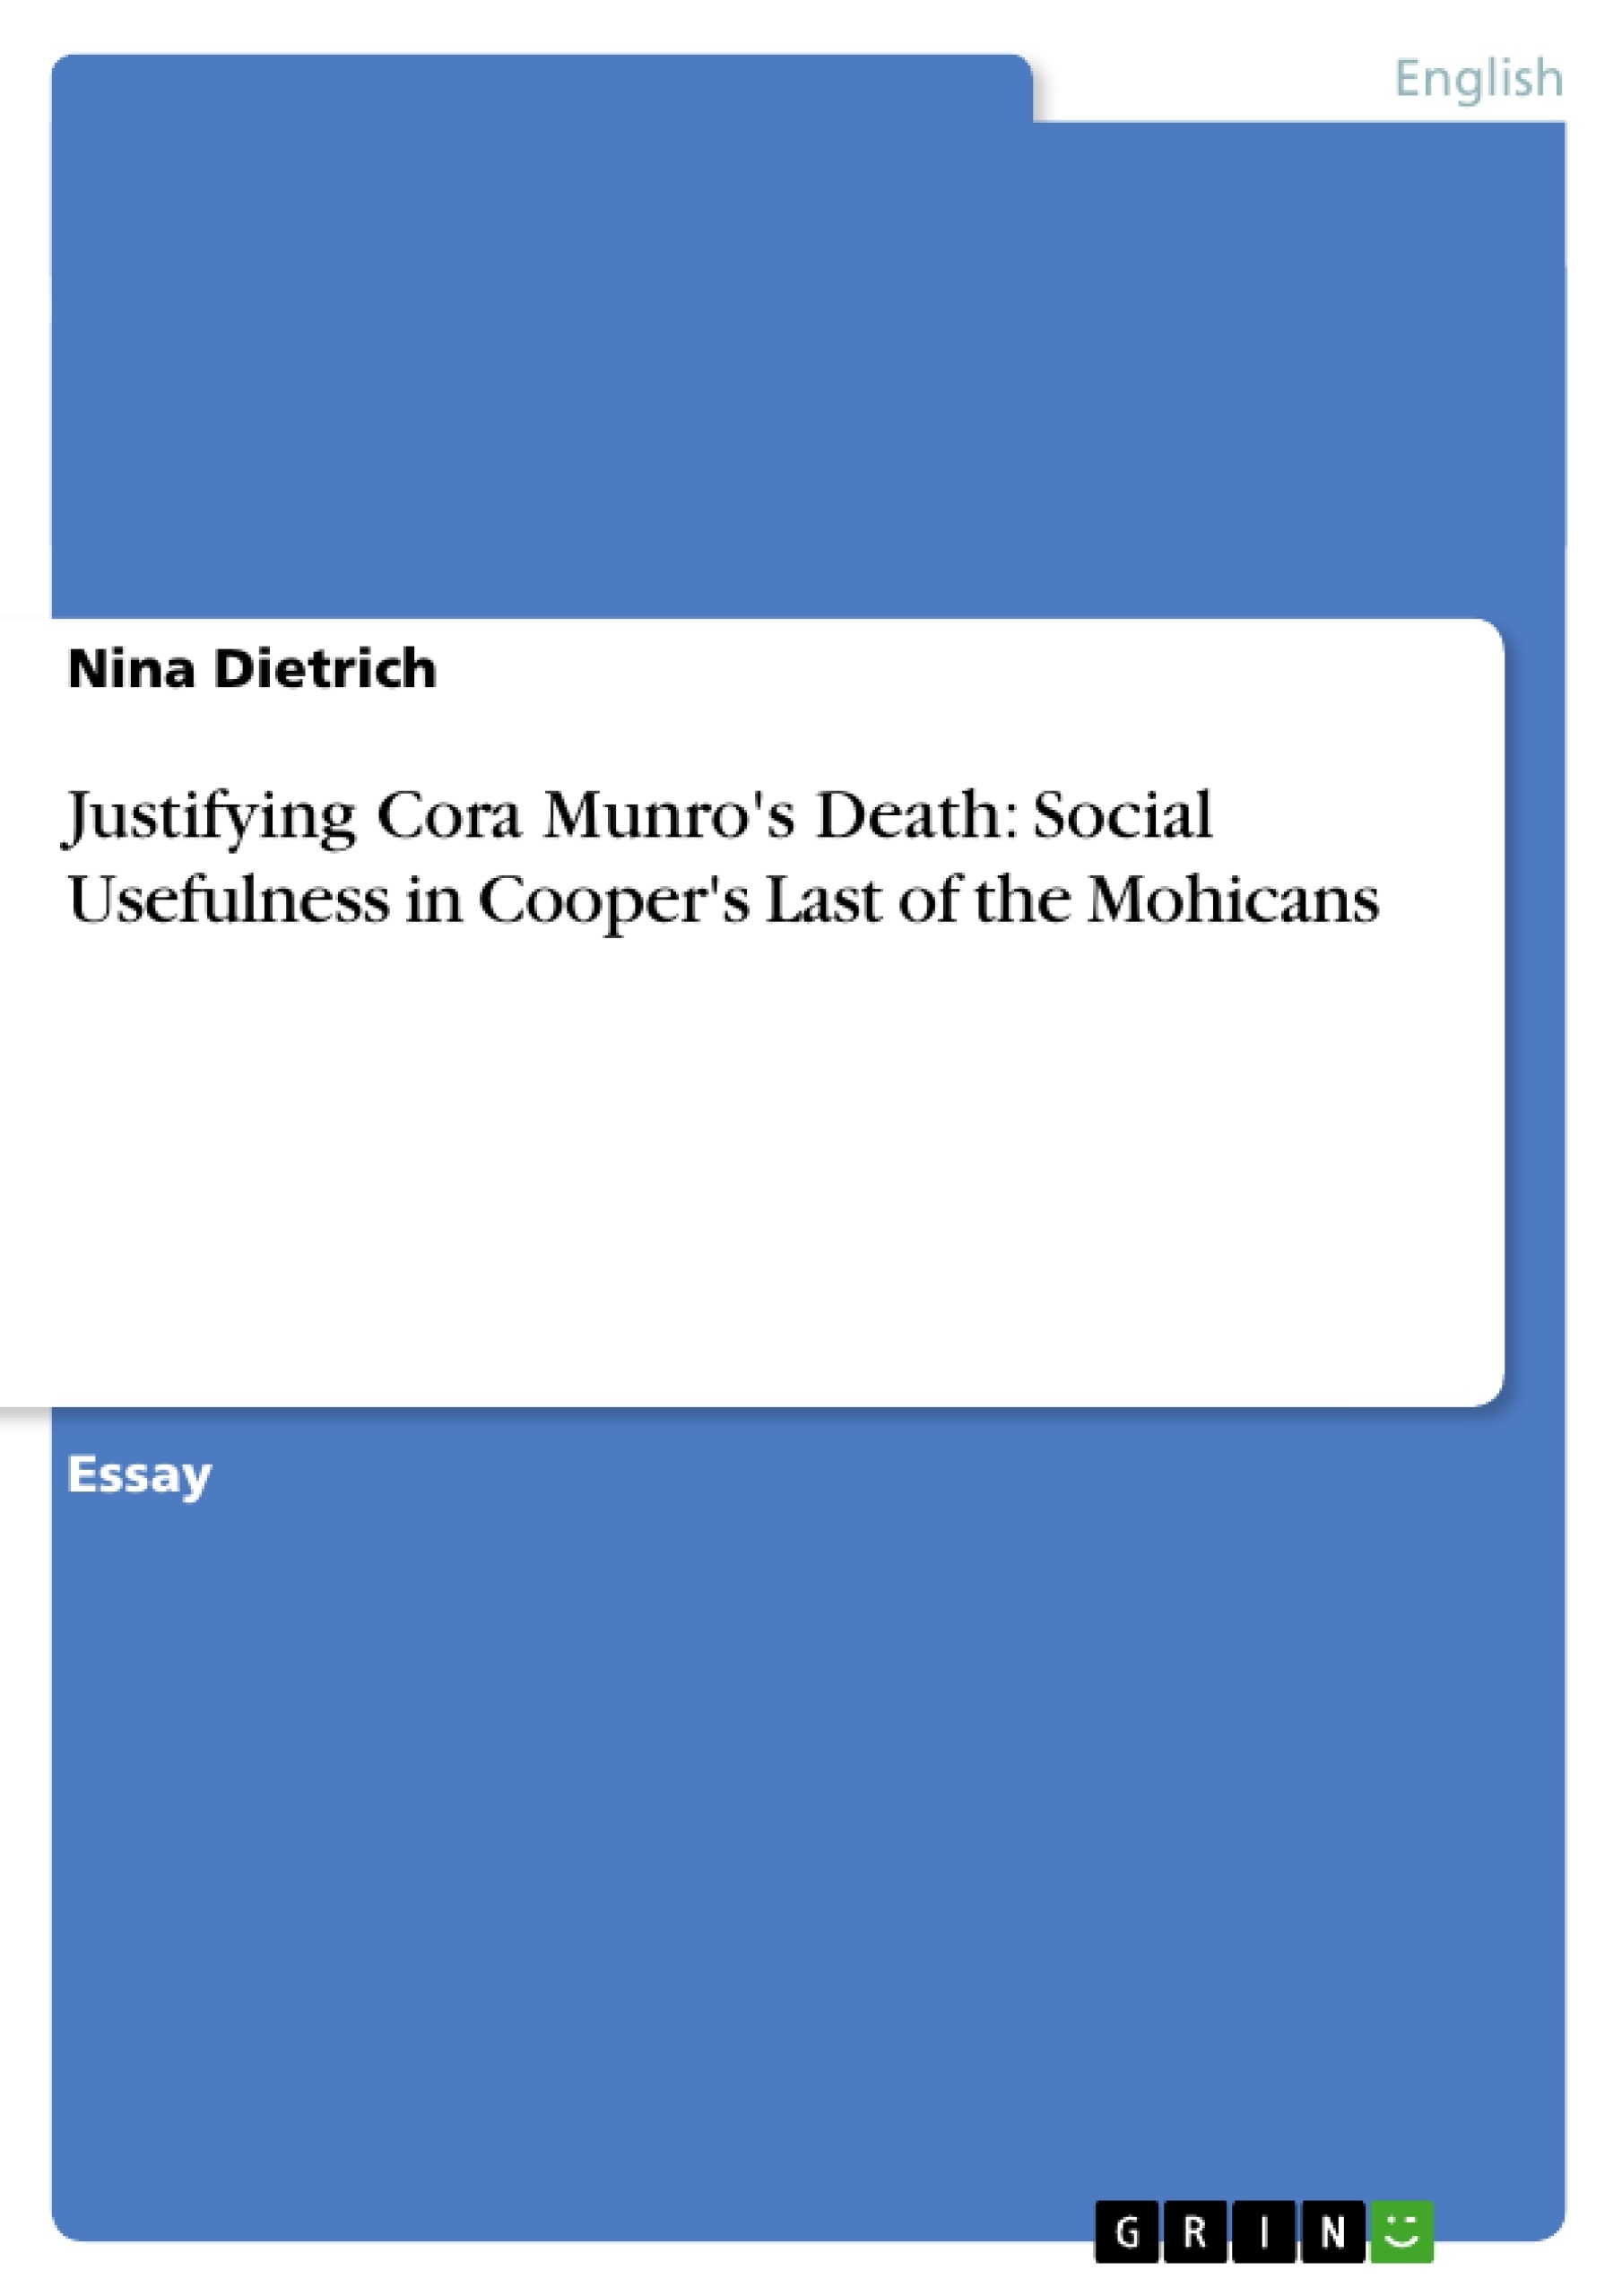 Title: Justifying Cora Munro's Death: Social Usefulness in Cooper's Last of the Mohicans